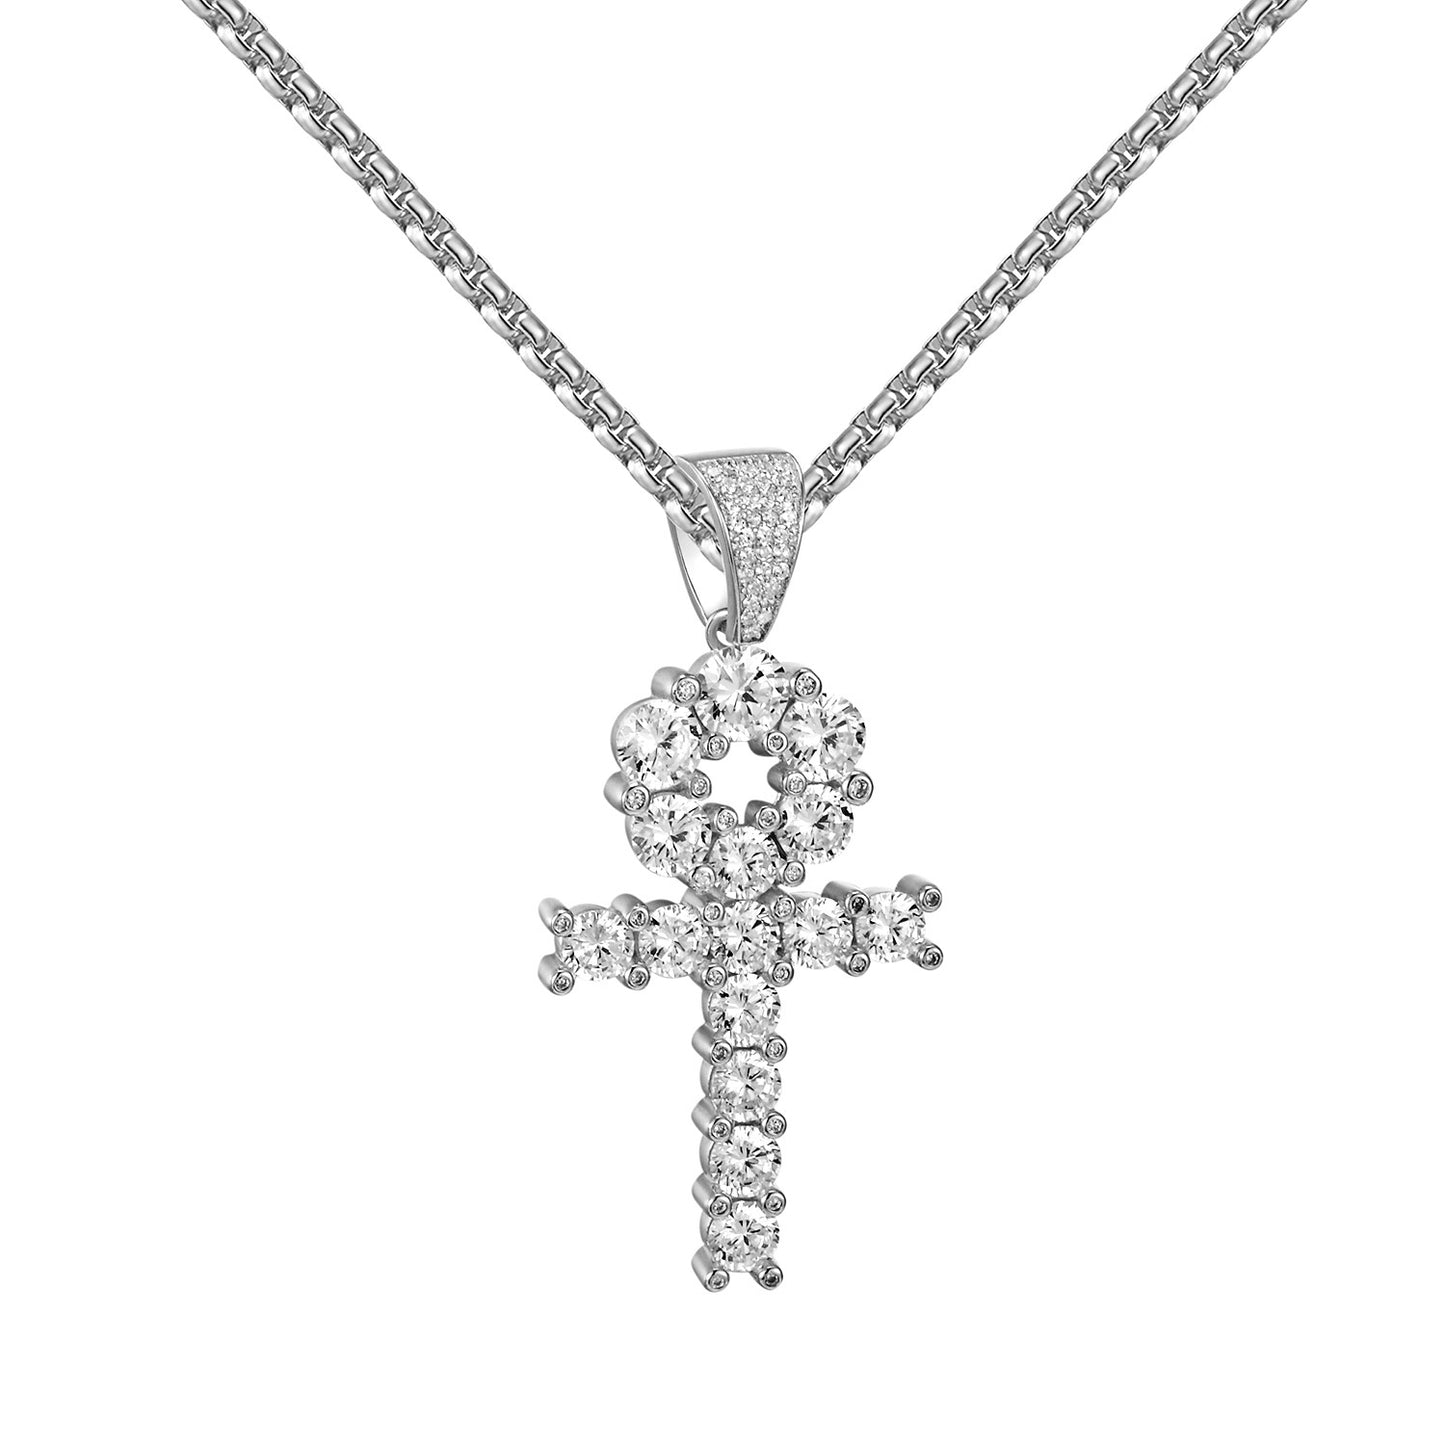 Sterling Silver Solitaire Ankh Cross Pendant Custom 2.0" Charm Bling Necklace